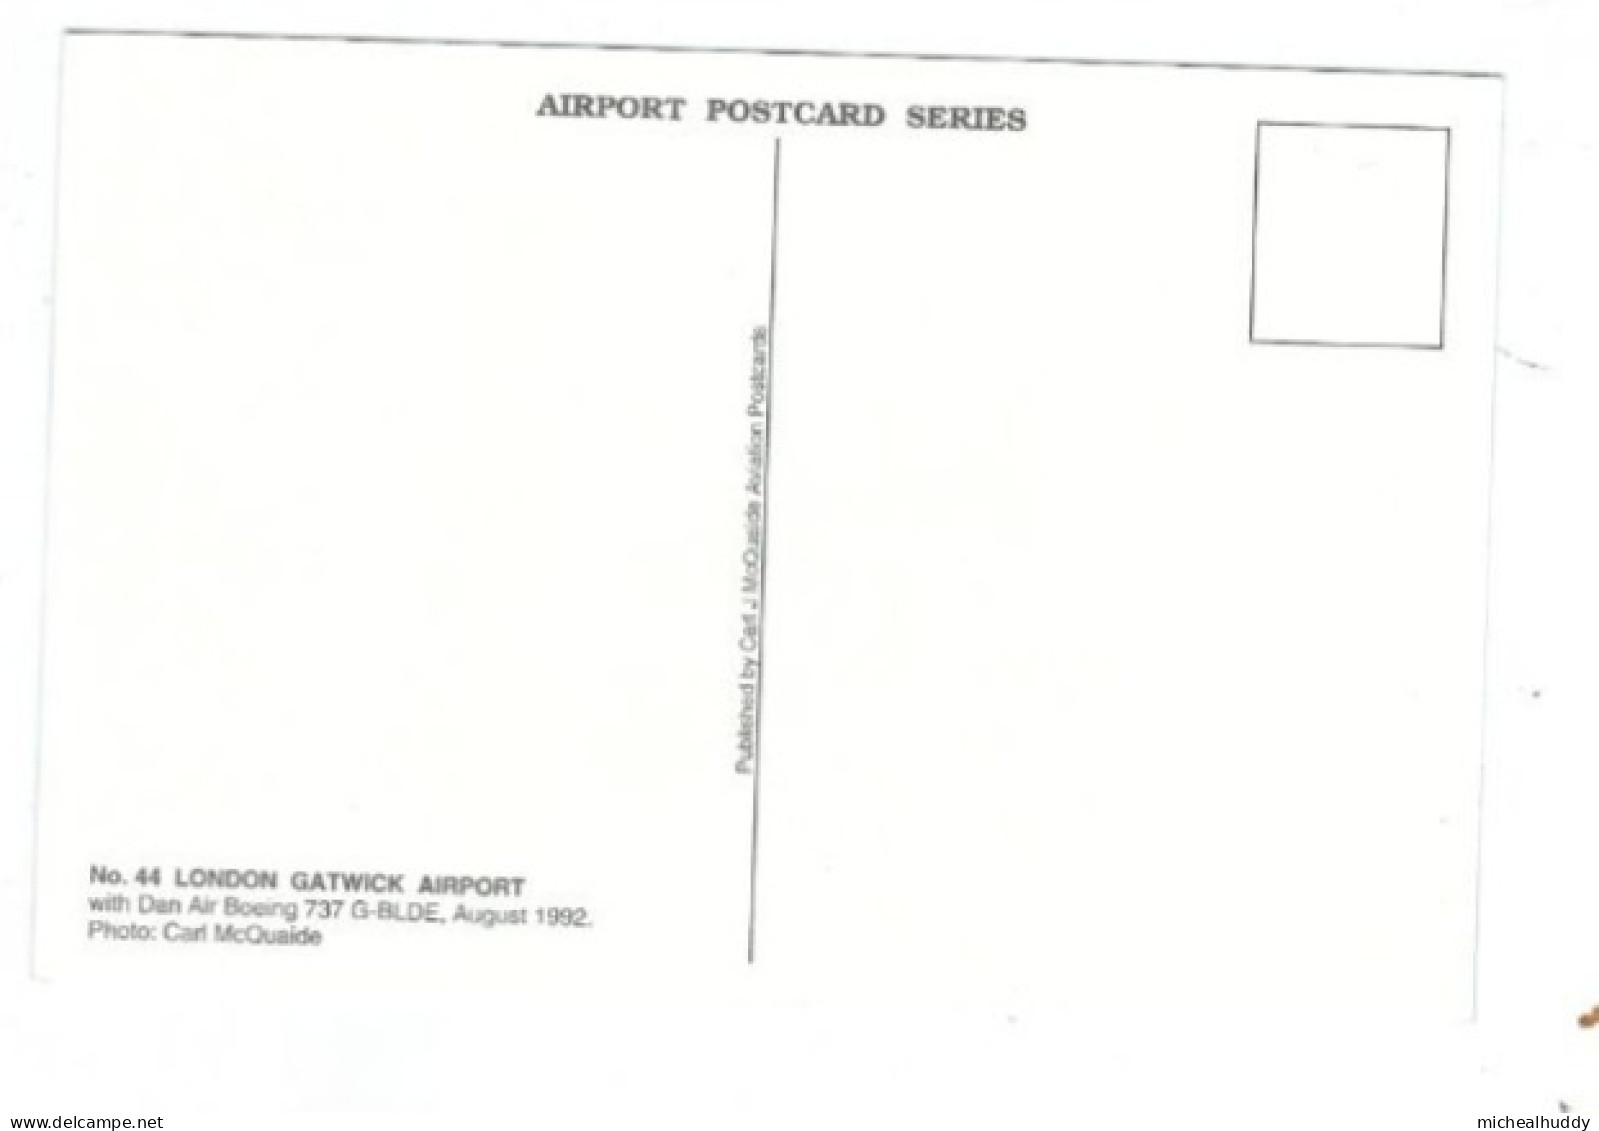 POSTCARD   PUBL BY  BY C MCQUAIDE IN HIS AIRPORT SERIES  LONDON GATWICK   CARD N0  44 - Vliegvelden